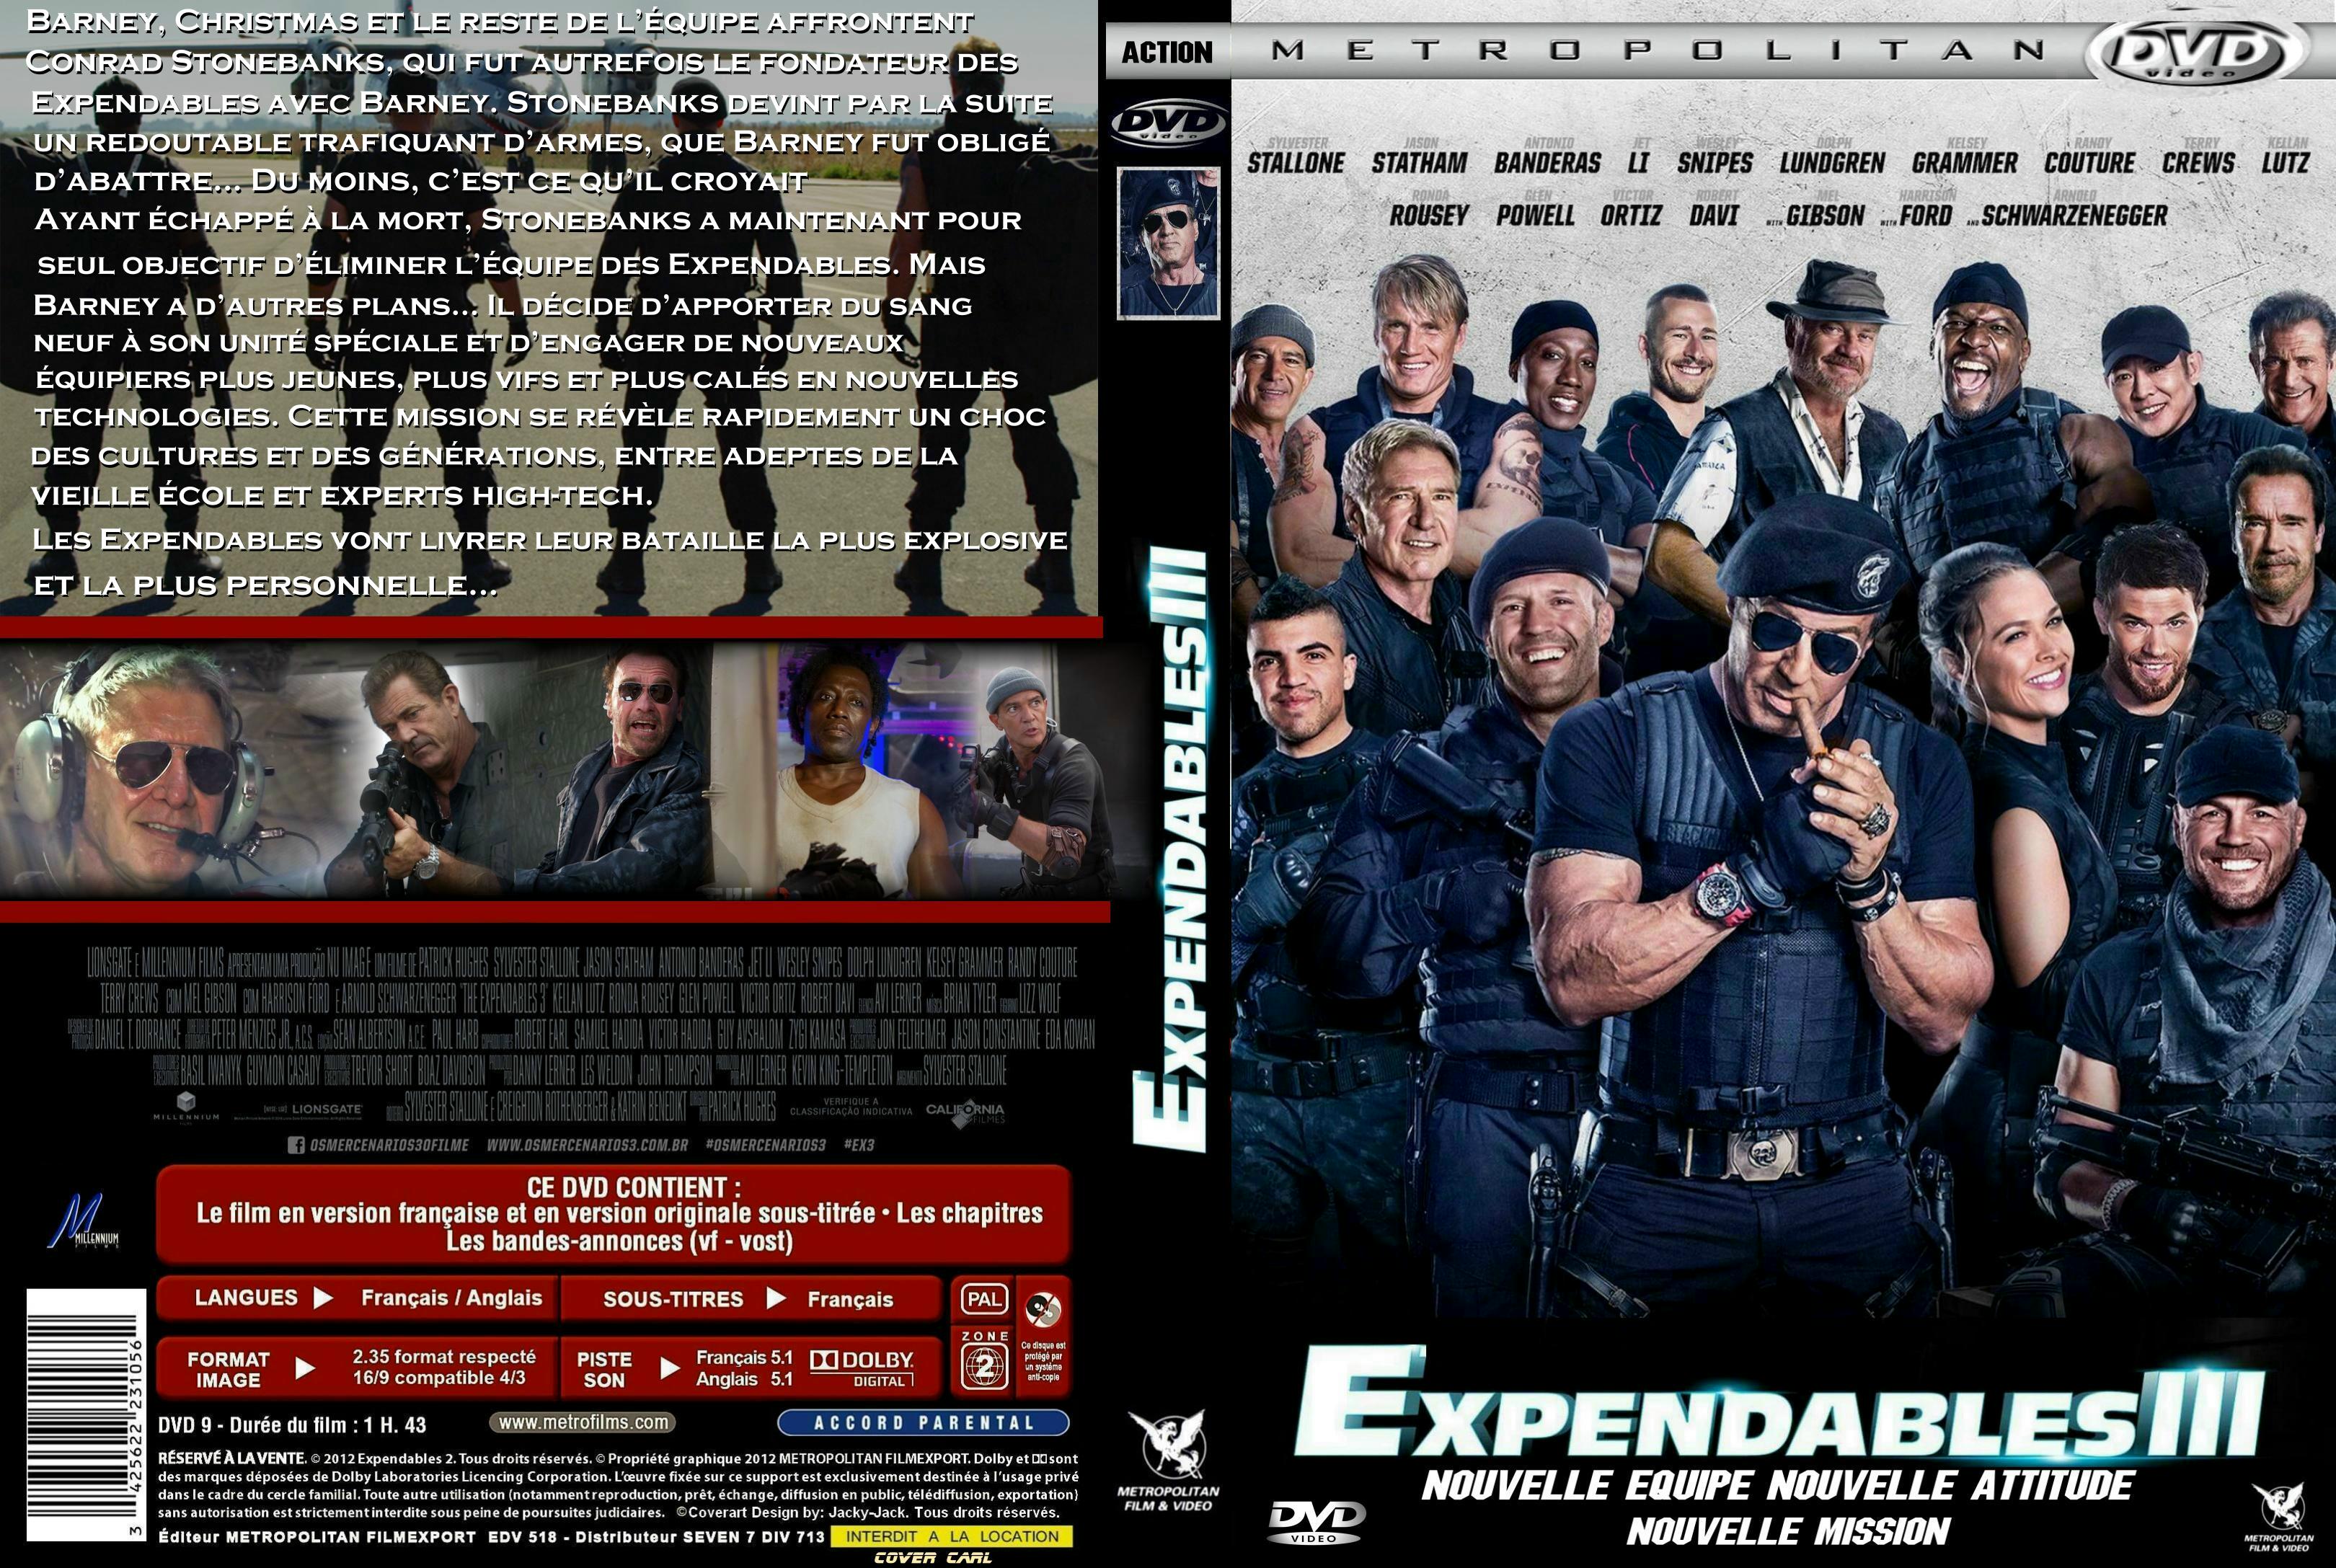 Jaquette DVD Expendables 3 custom